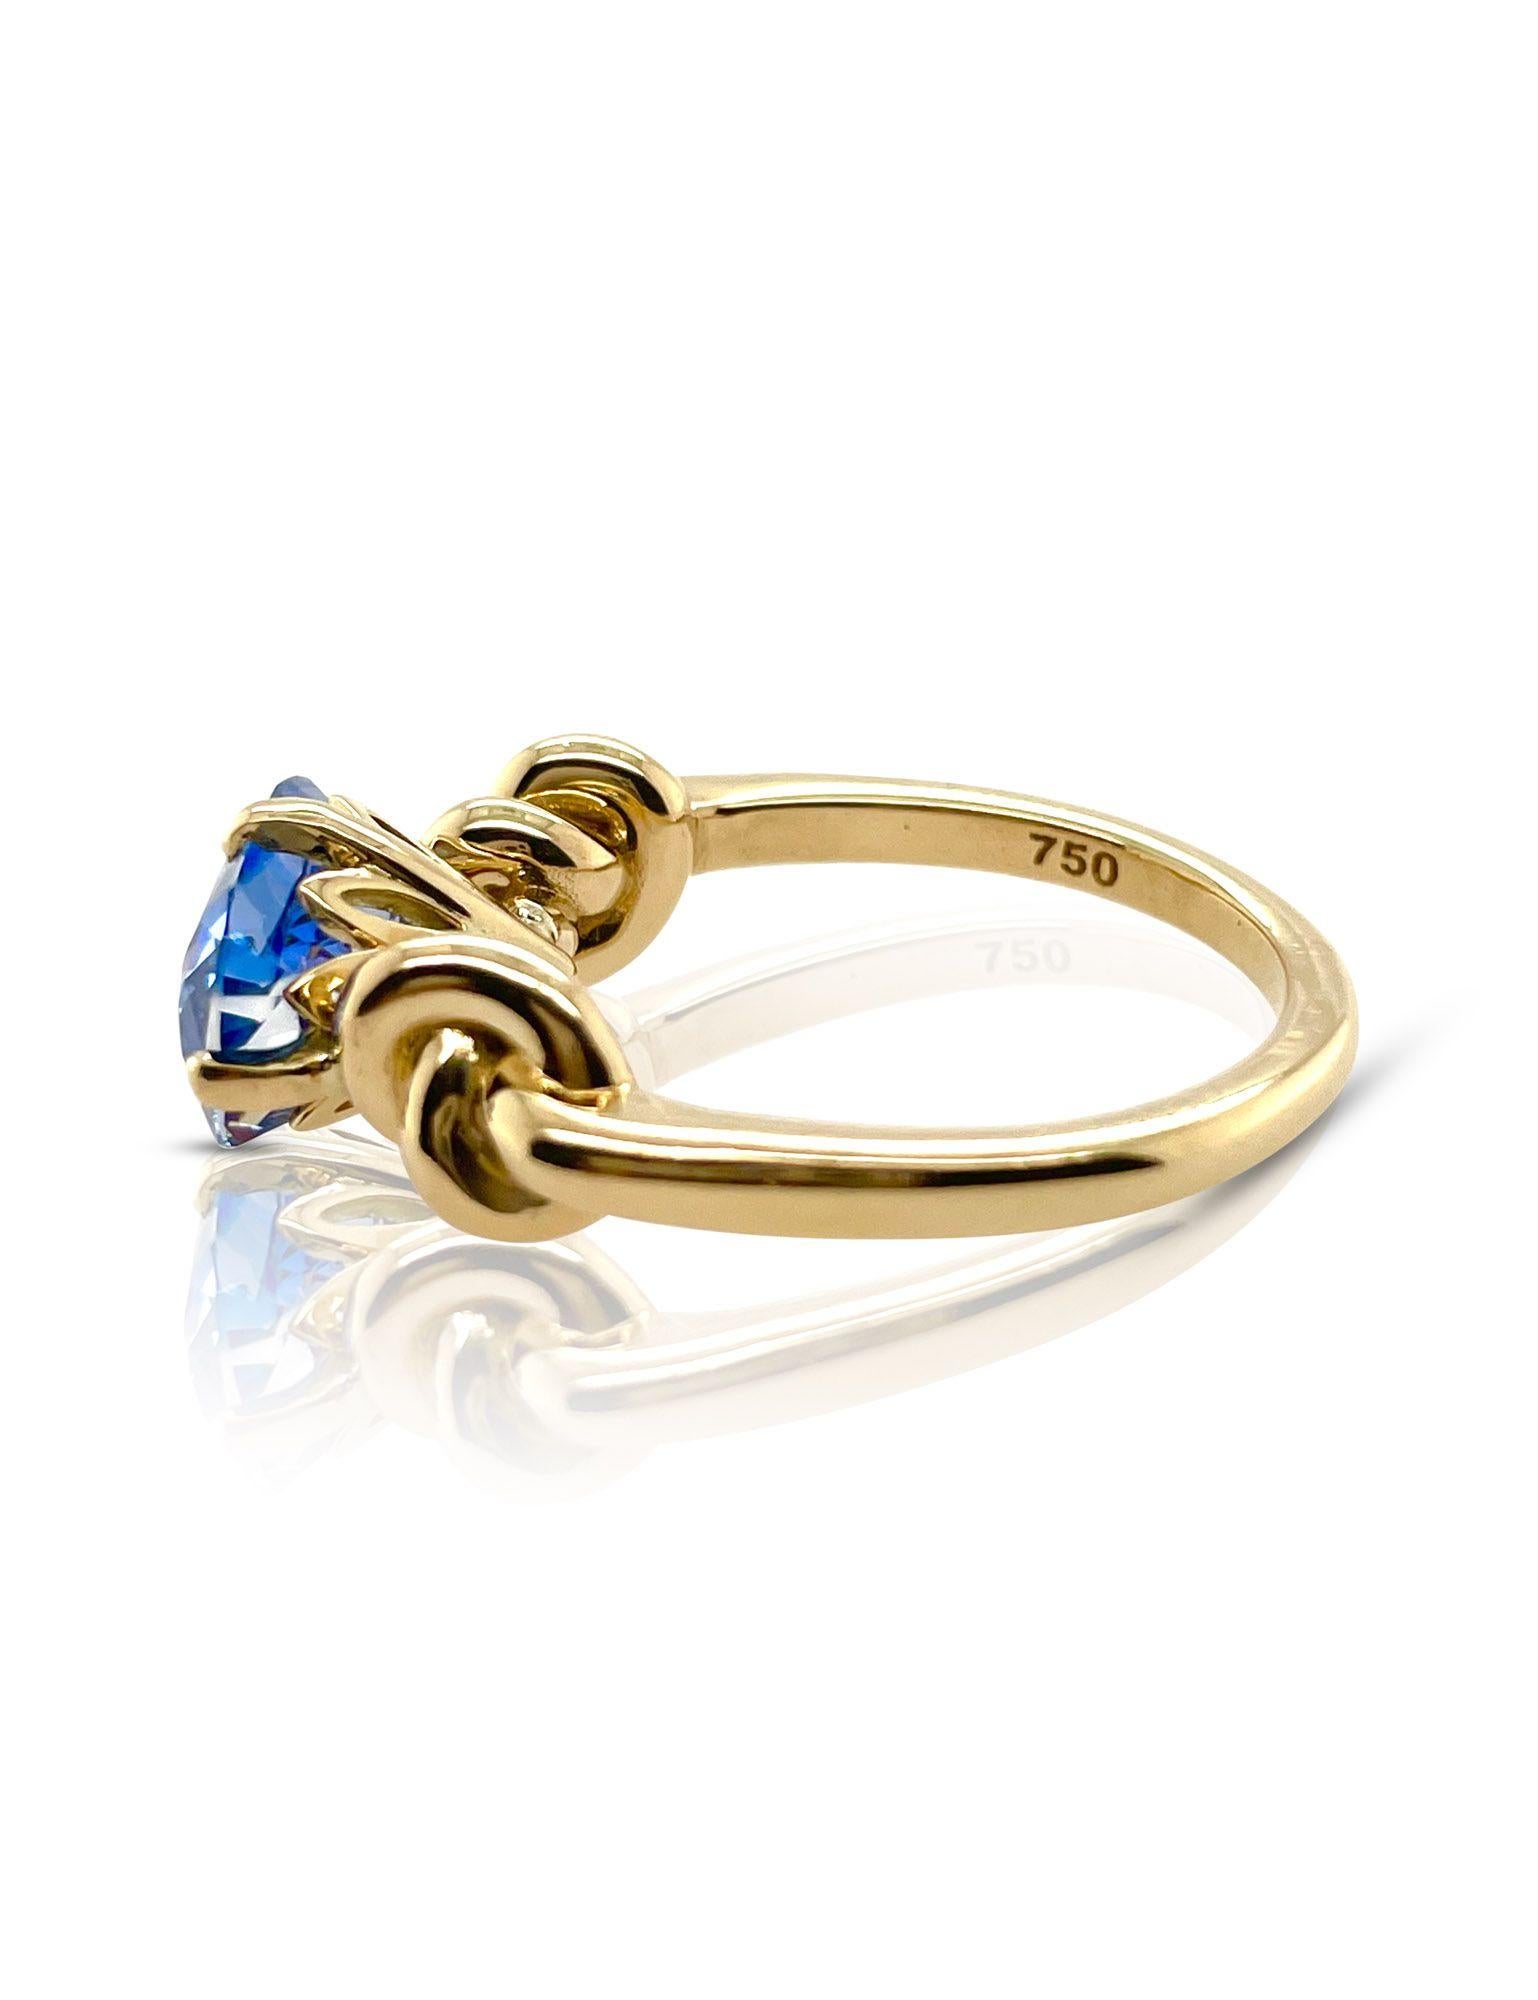 For Sale:  3ct Blue Ceylon Sapphire Cushion Cut Forget Me Knot Ring in 18ct Yellow Gold 13